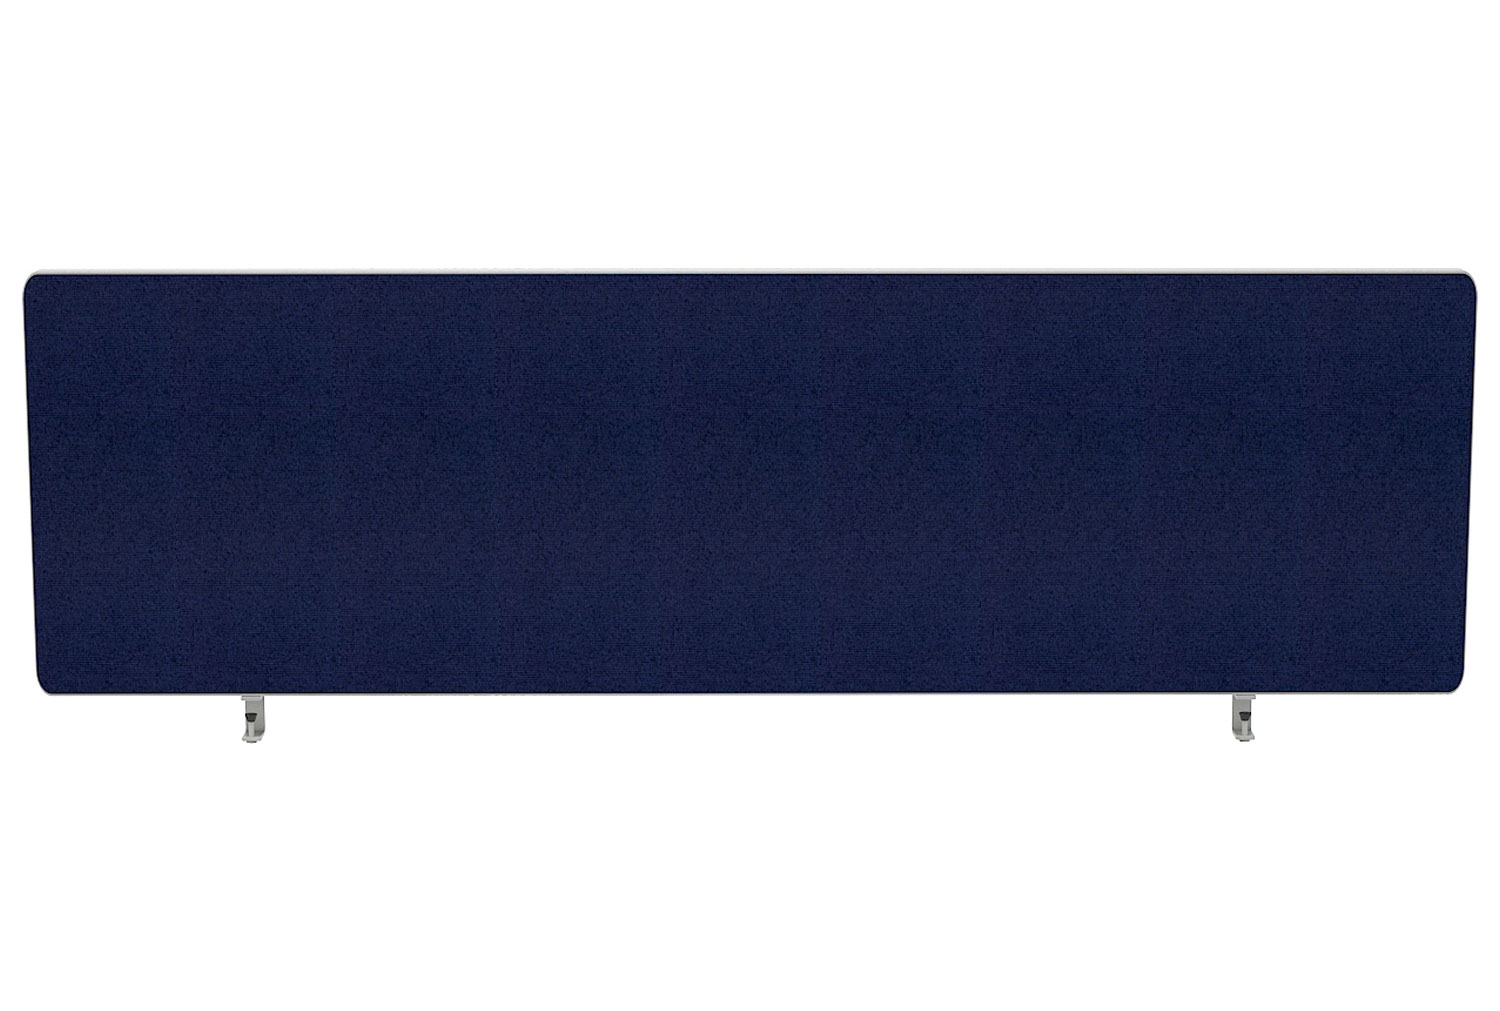 Griffin Rectangular Desktop Office Screens With Rounded Corners, 180wx2dx30h (cm), Royal Blue